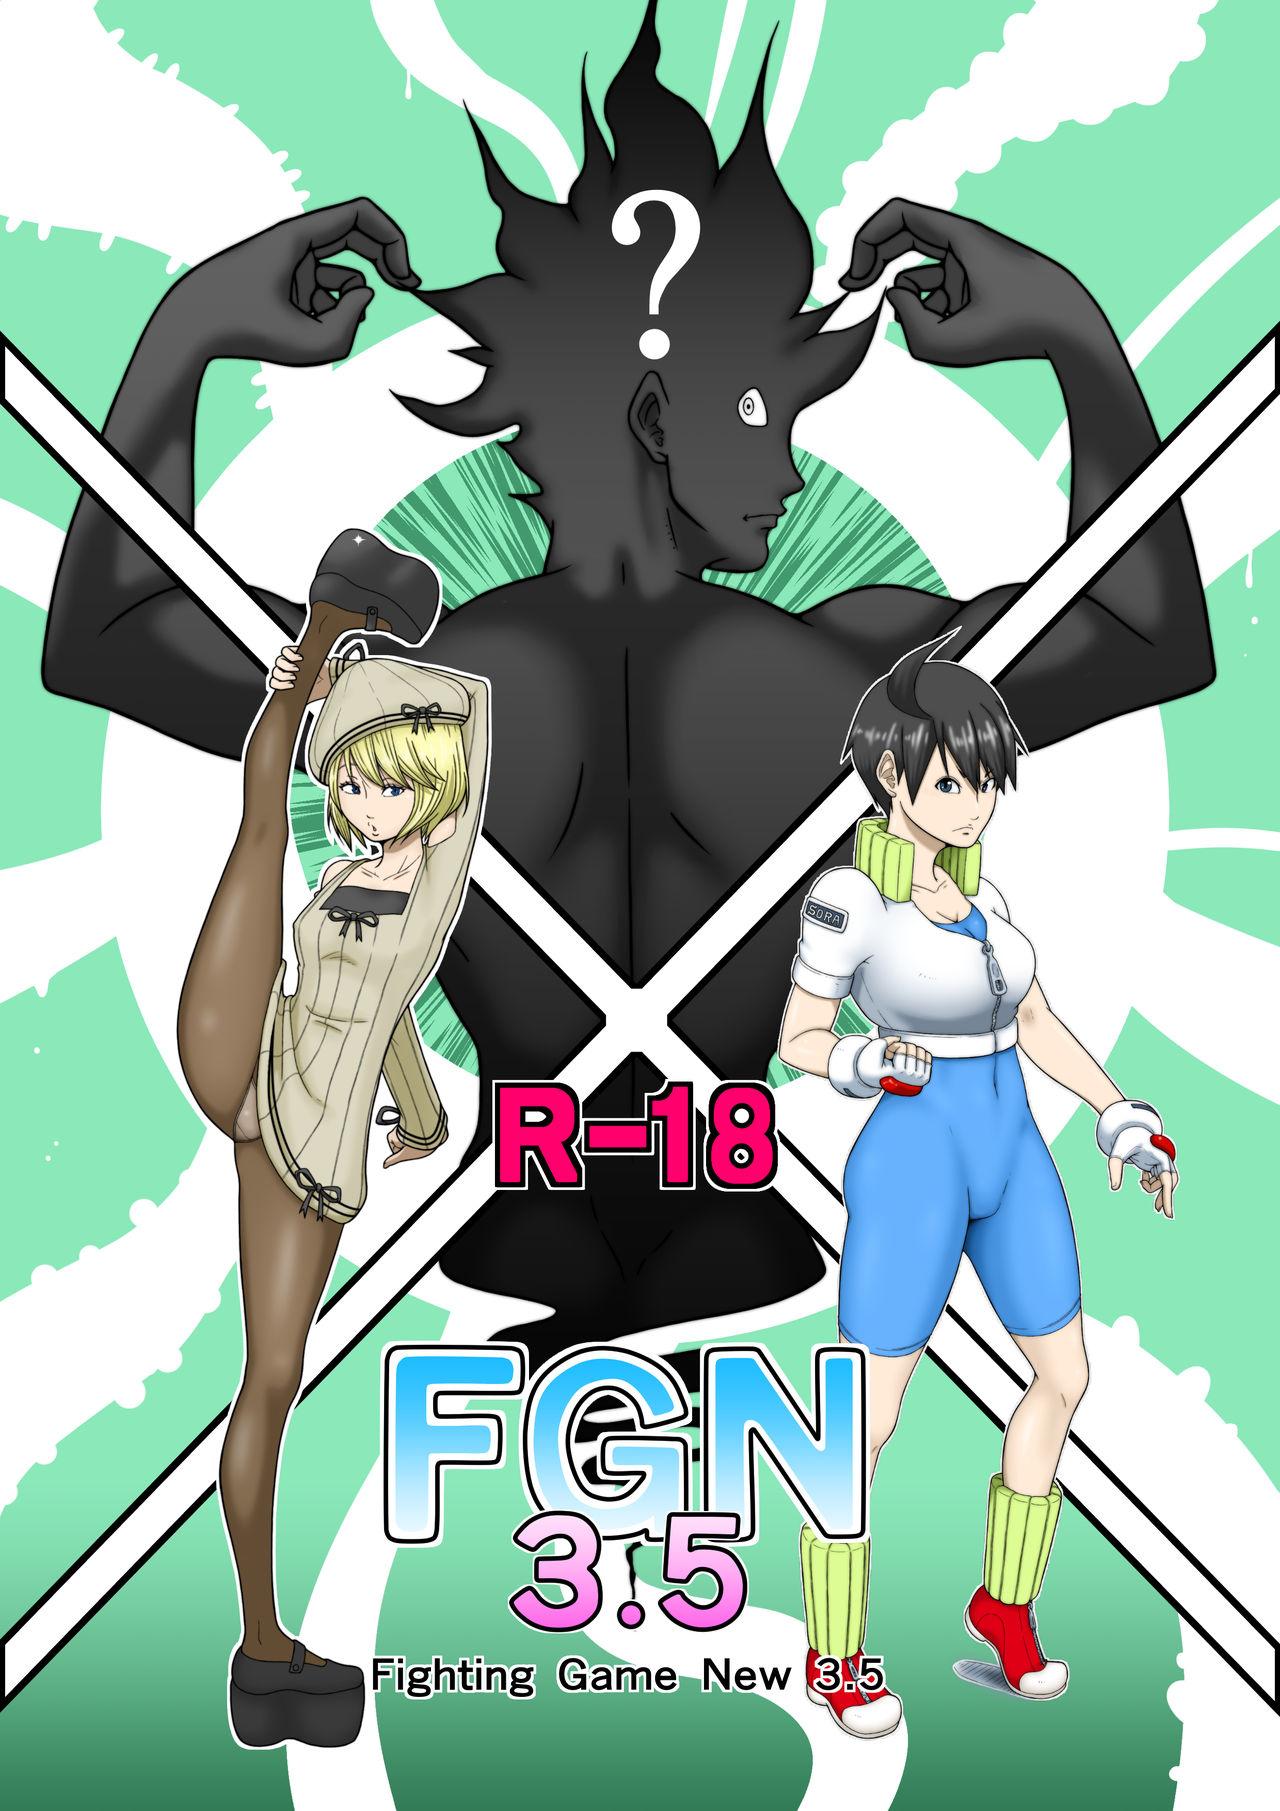 Bitch Fighting Game New 3.5 - Original Horny - Picture 1